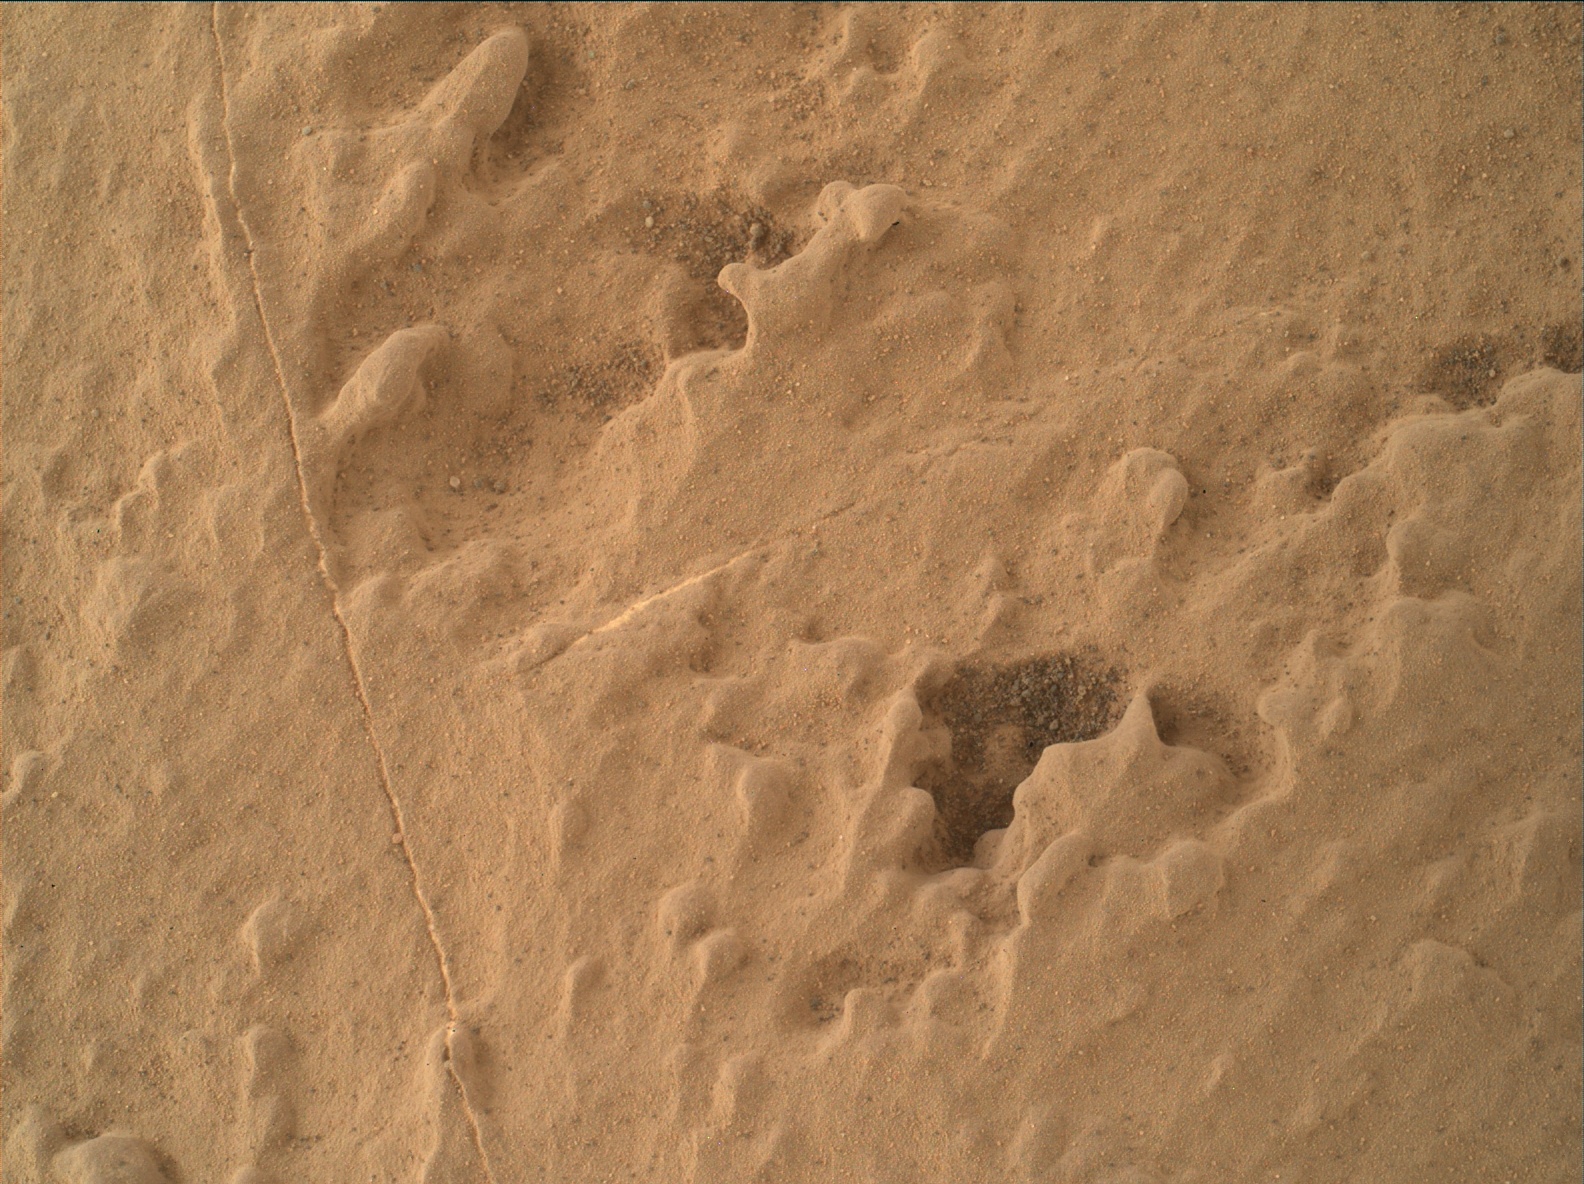 Nasa's Mars rover Curiosity acquired this image using its Mars Hand Lens Imager (MAHLI) on Sol 1869